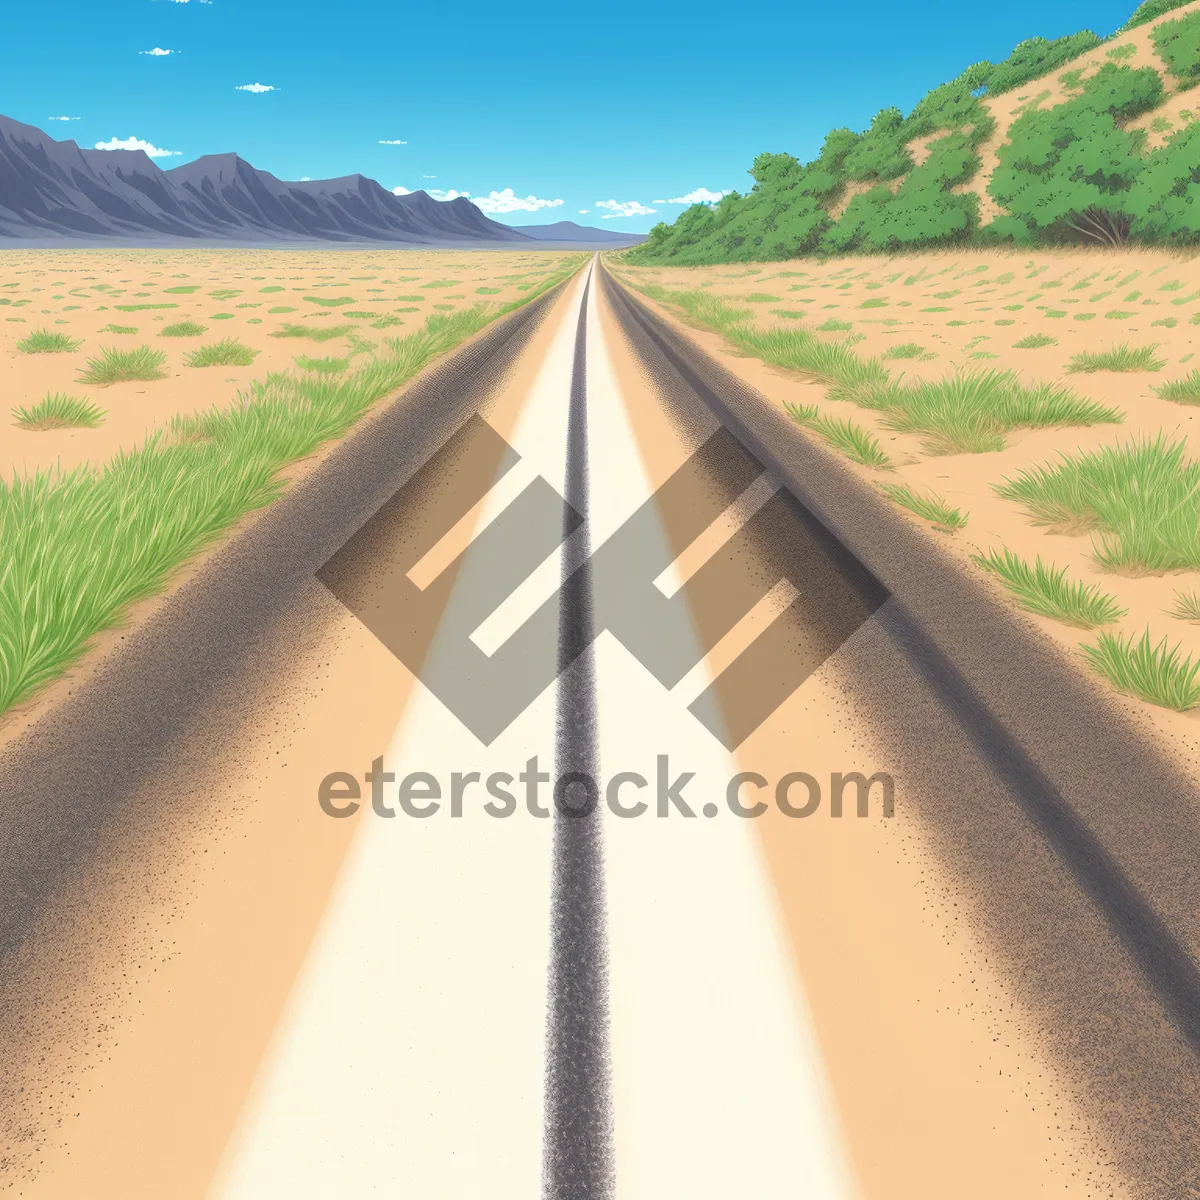 Picture of Endless Road through Rural Landscape